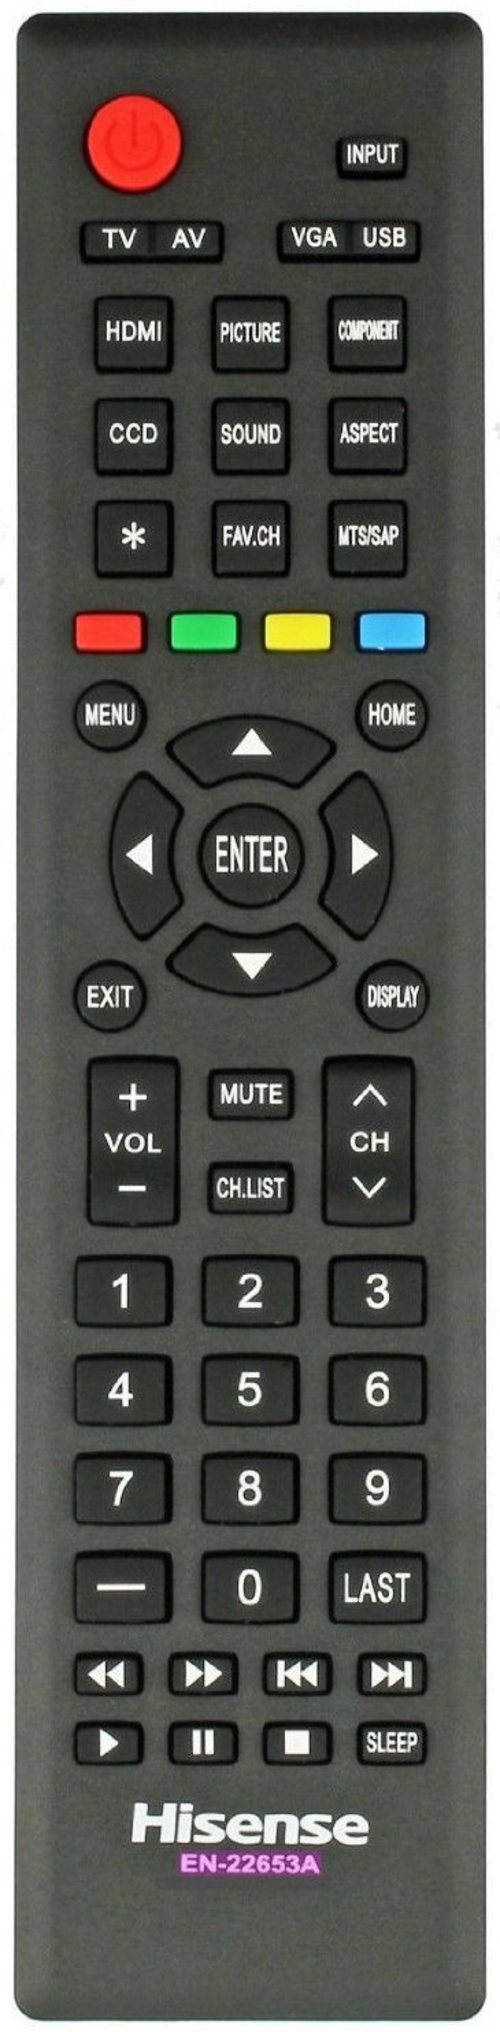 Hisense EN-22653A Remote Control for HDTV - 2 x AAA (Batteries Not Included)